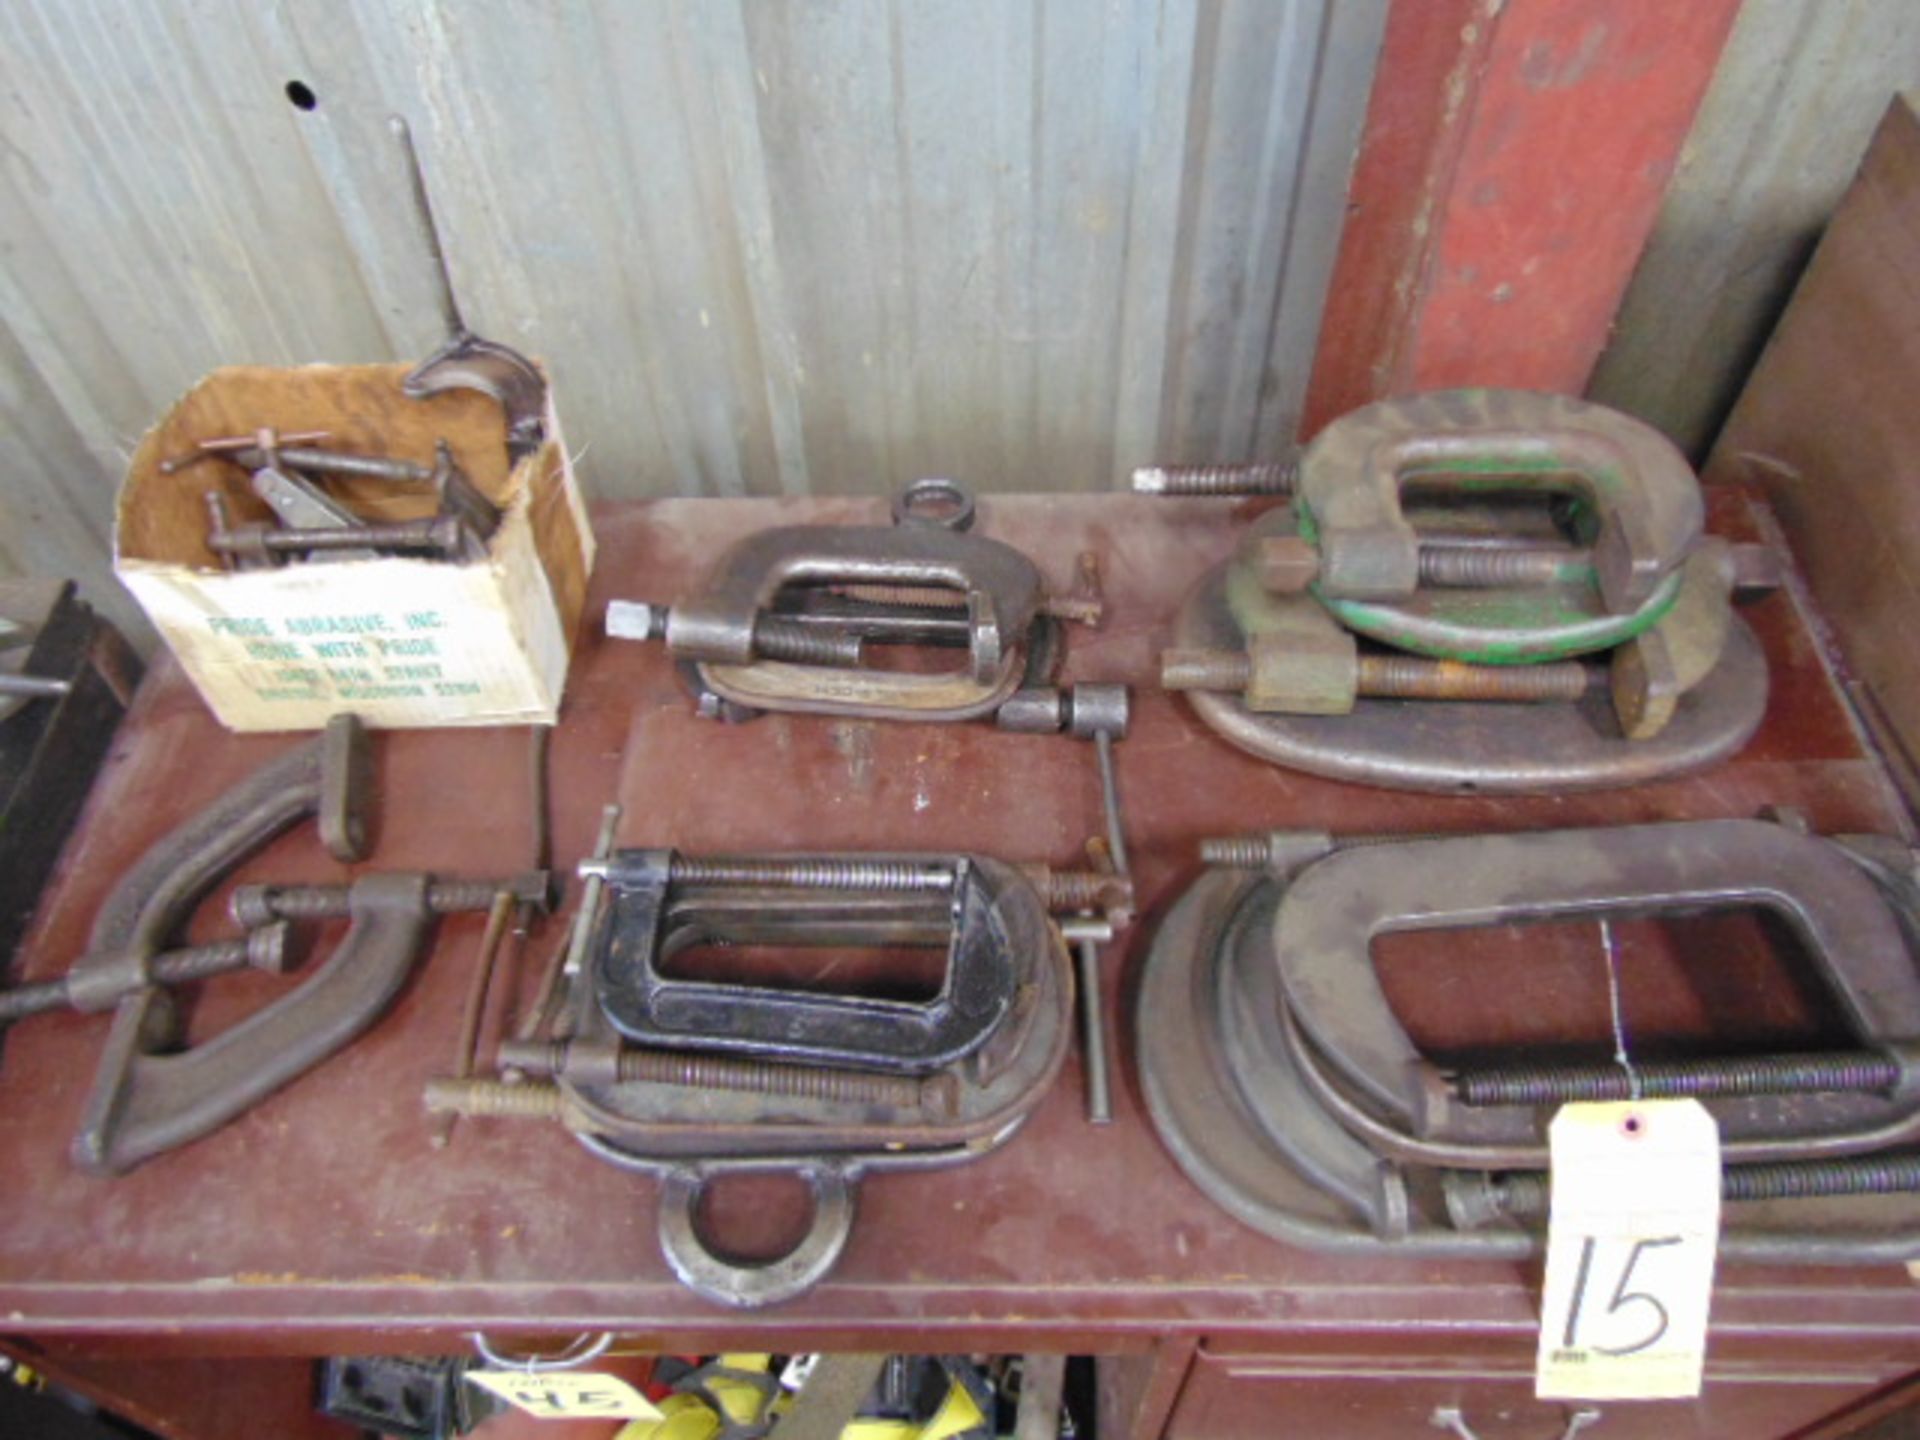 LOT OF C-CLAMPS, assorted